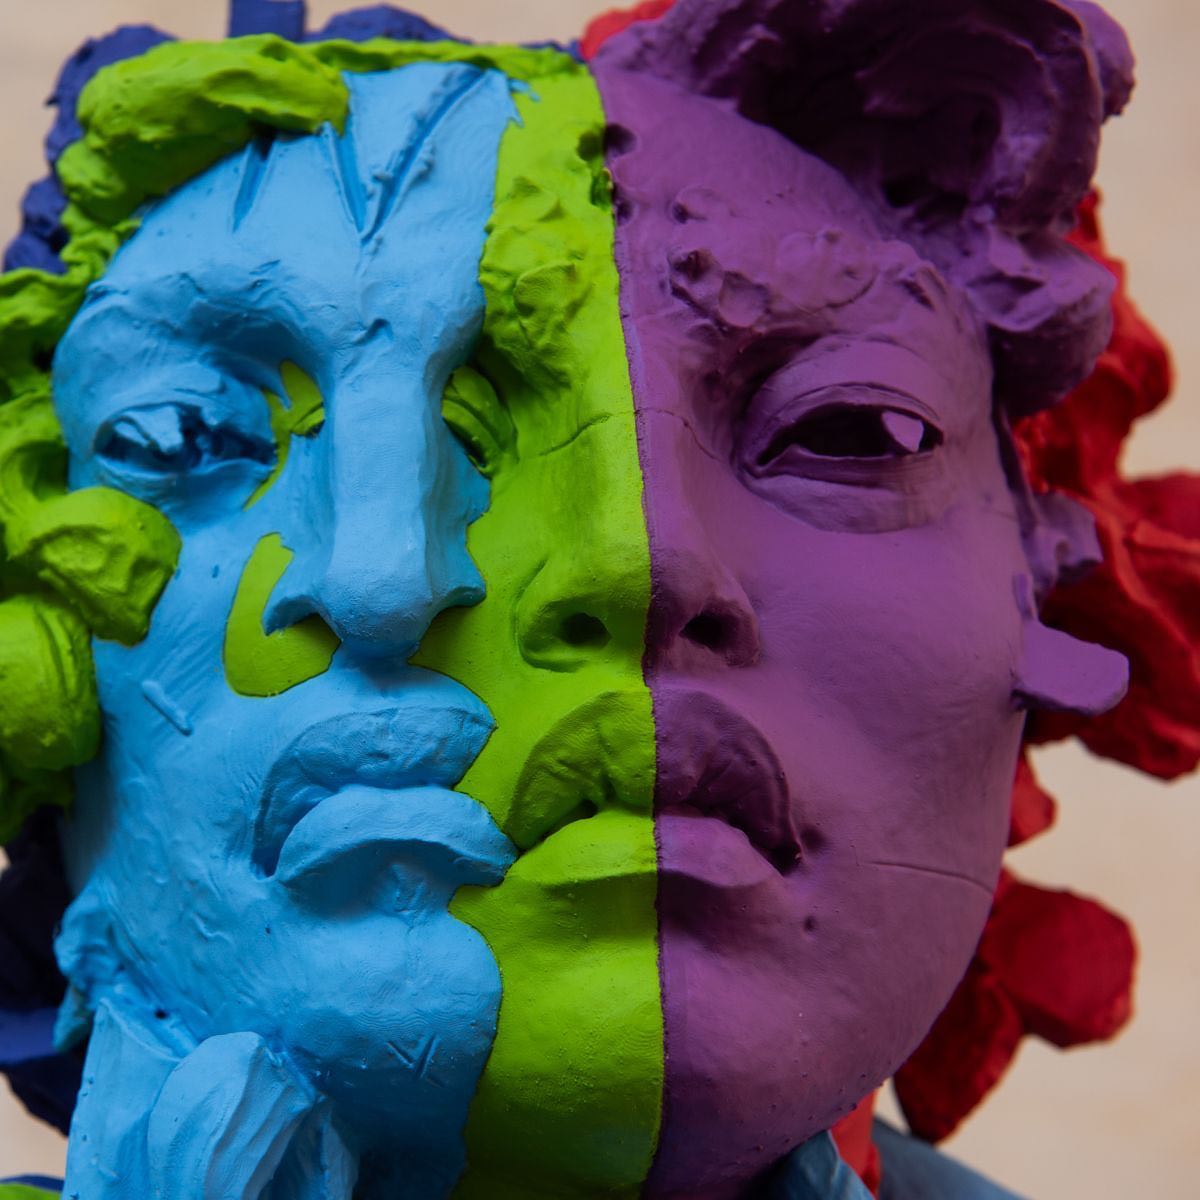 Multicolored 3d Printed Sculptures By Javier Marin (4)